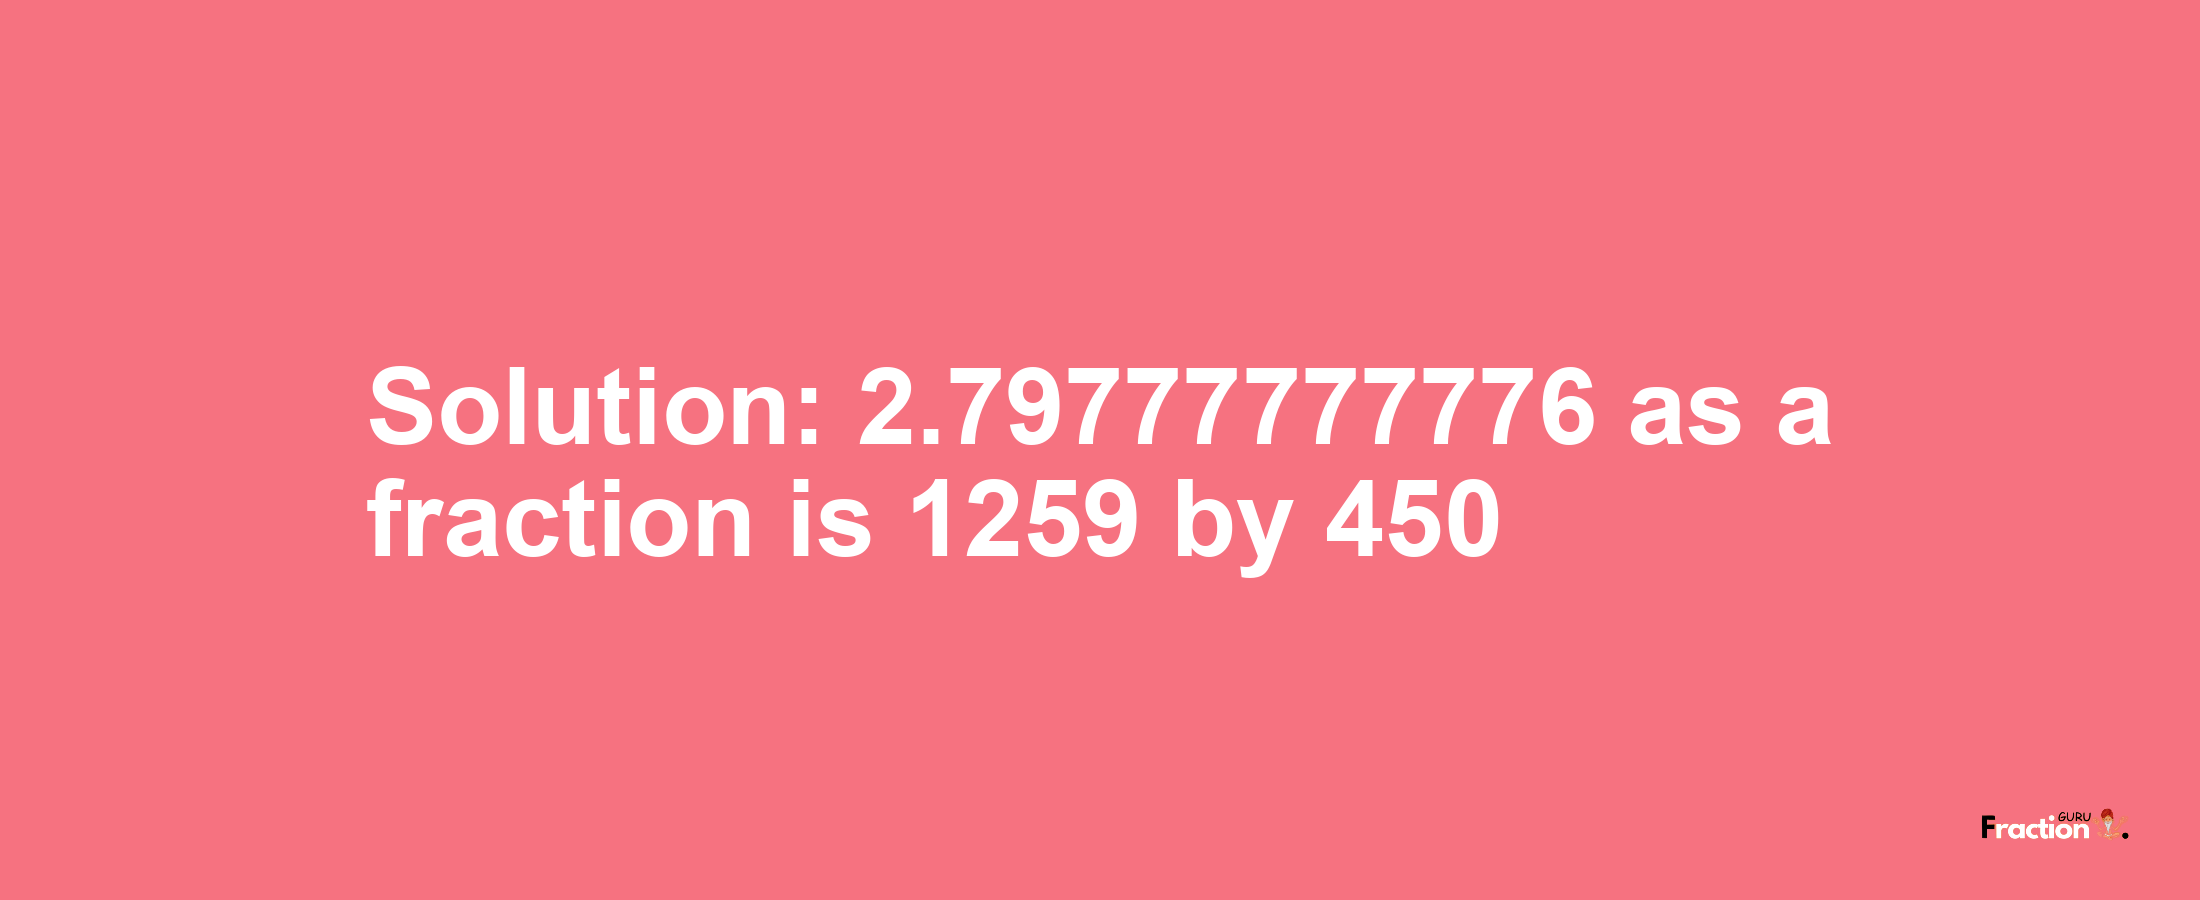 Solution:2.79777777776 as a fraction is 1259/450